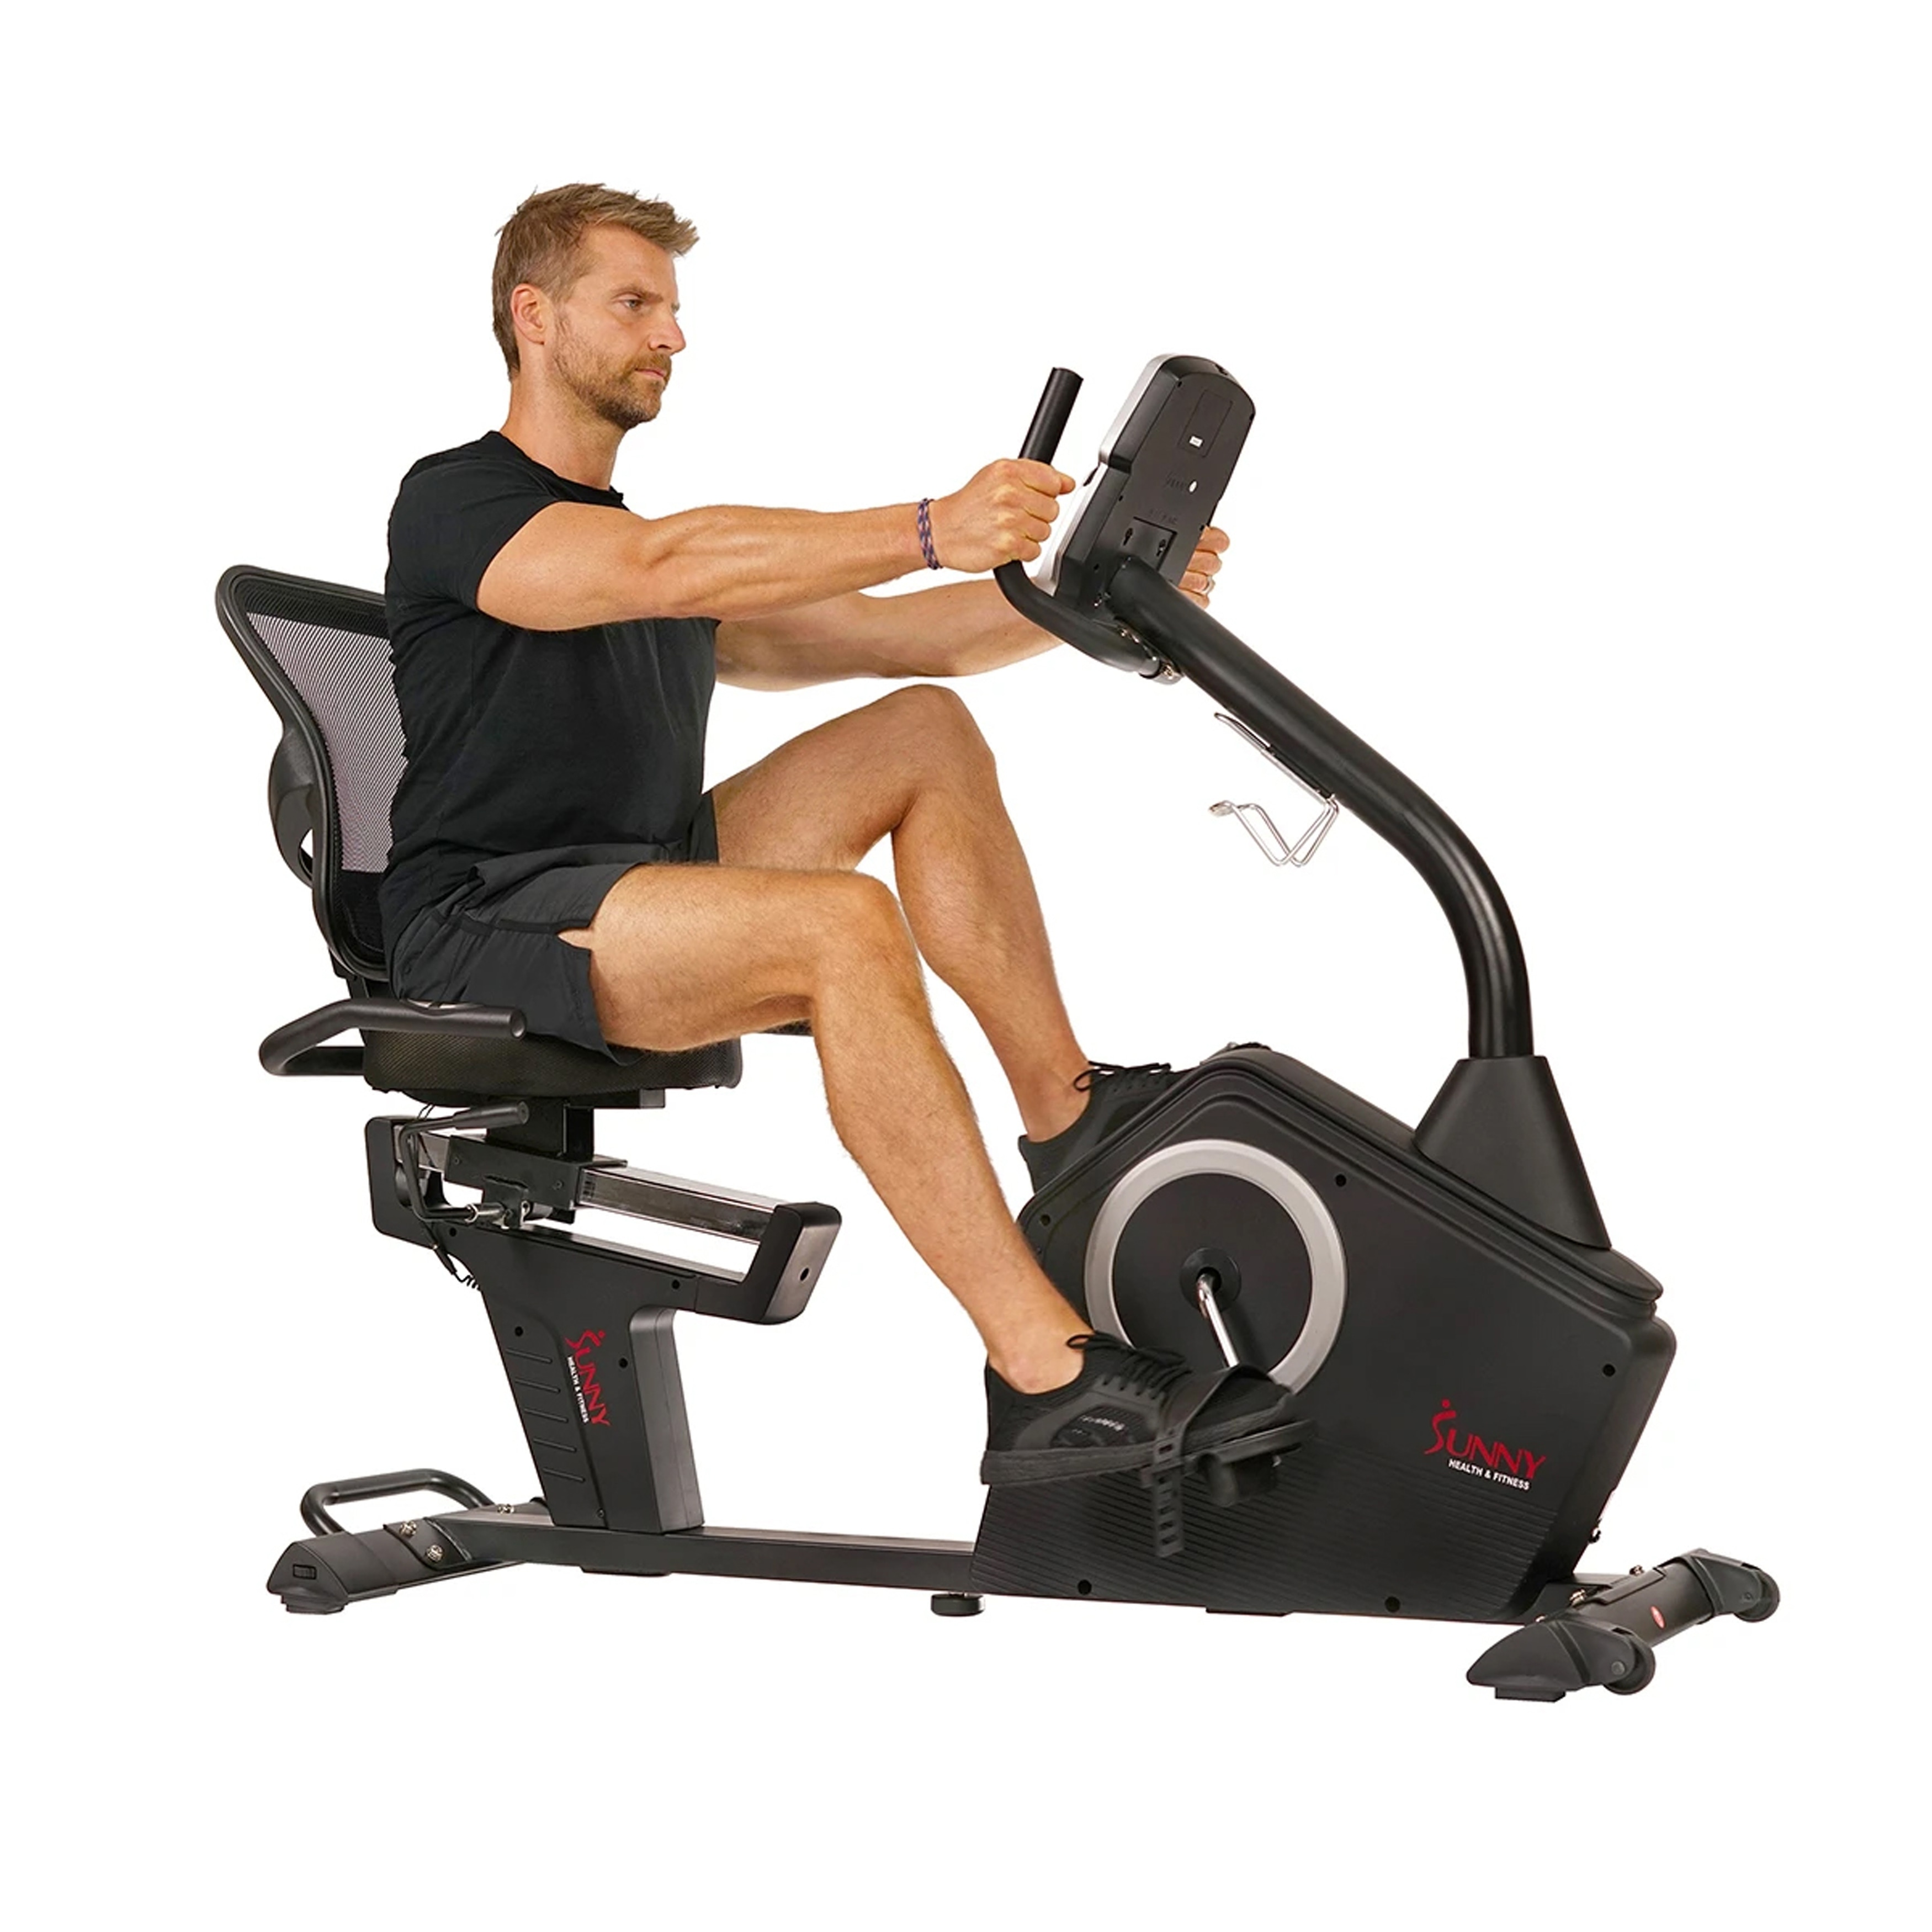 https://ak1.ostkcdn.com/images/products/is/images/direct/ef6341973bf78fa11405d08103ac2fe1d44090e6/Sunny-Health-%26-Fitness-Stationary-Recumbent-Bike---SF-RB4850.jpg